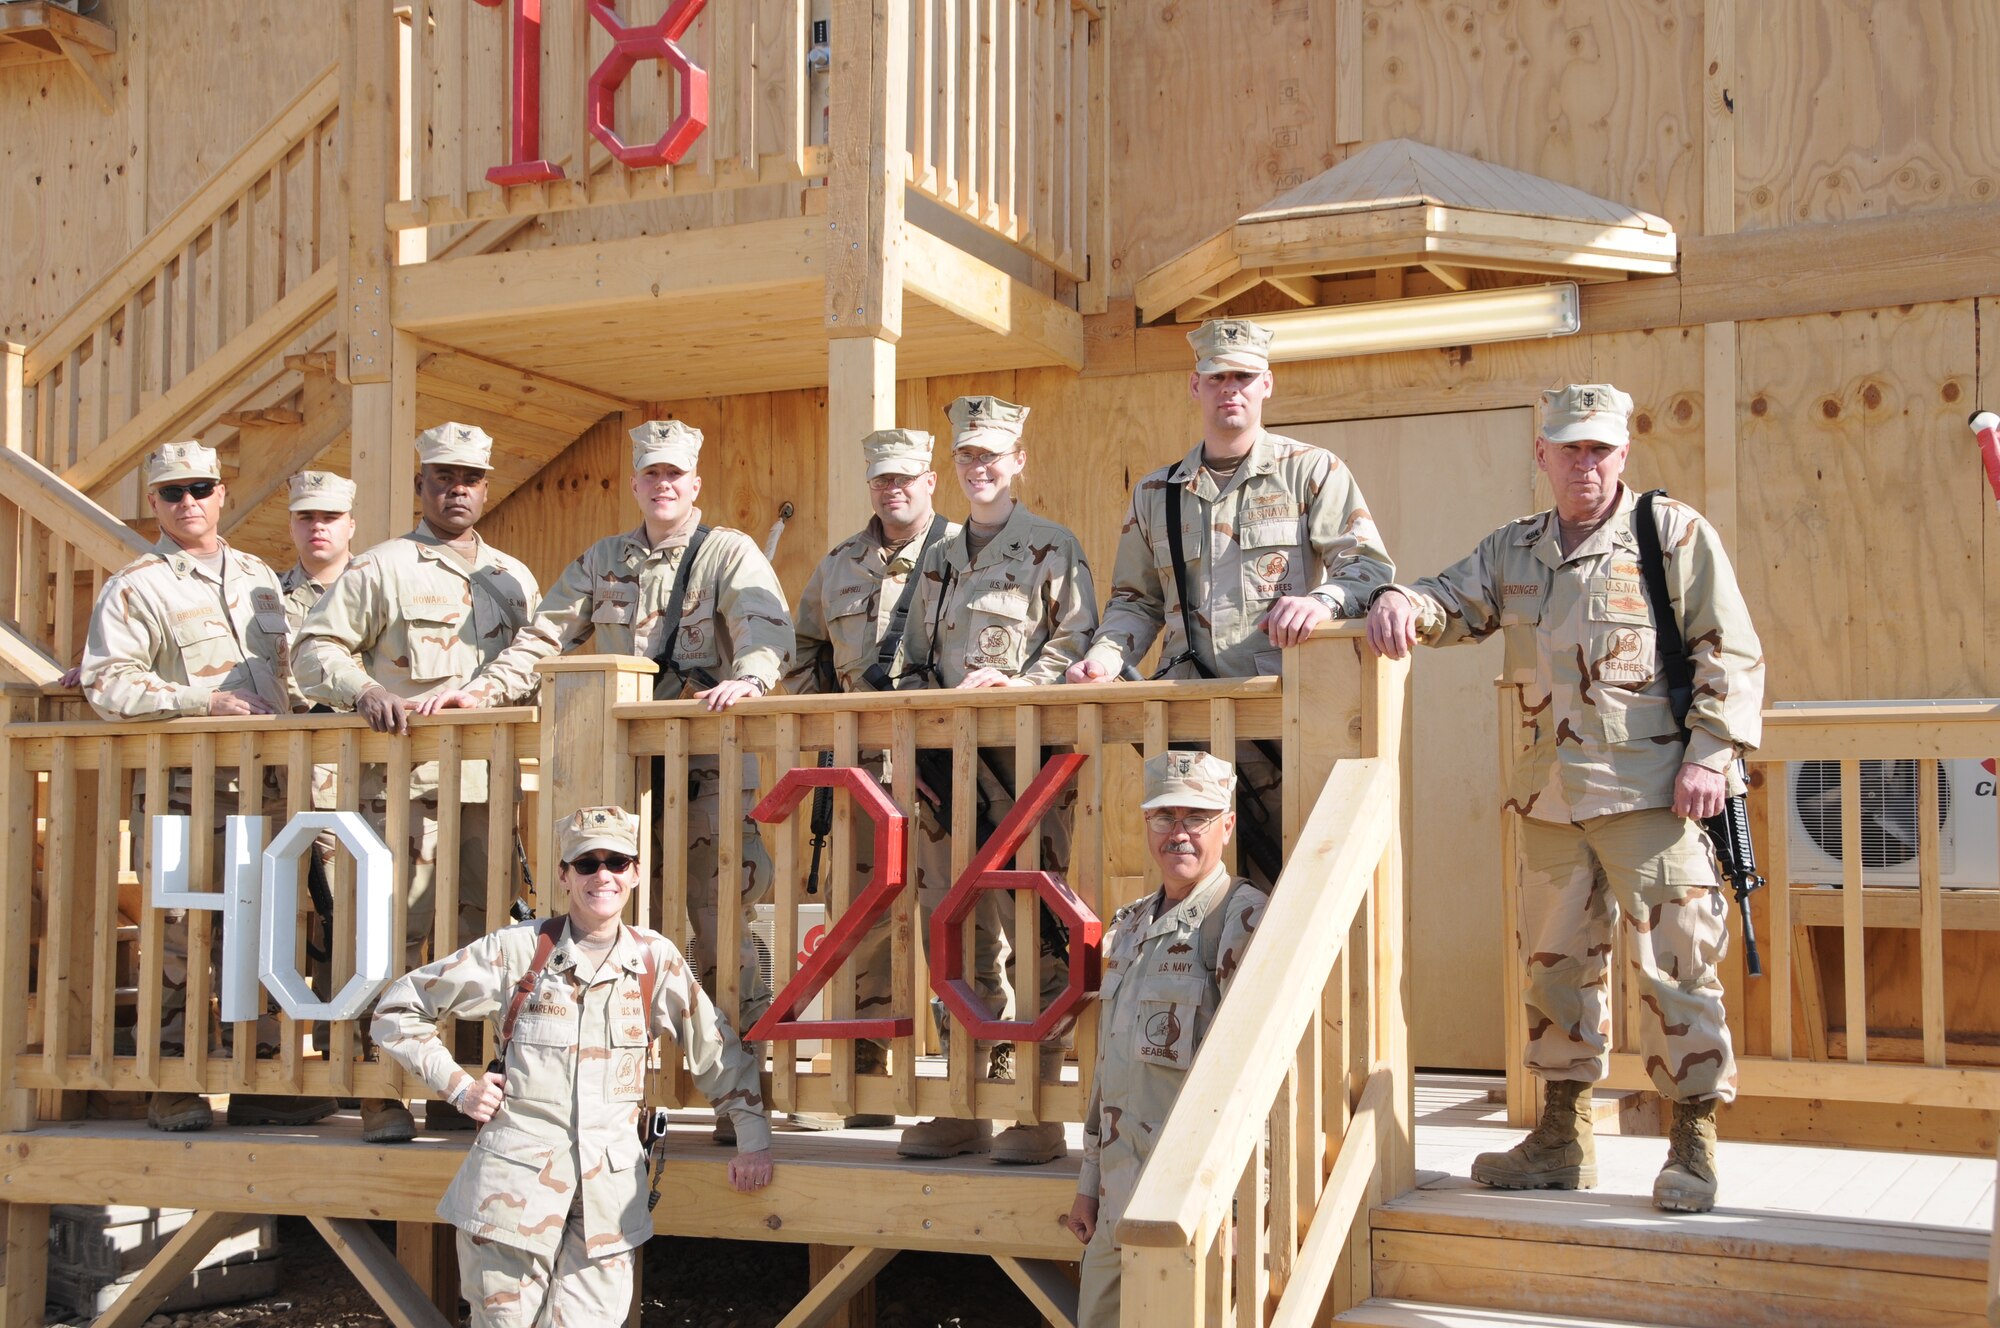 Commander Regina Marengo, lower left, stands with some of the Sailors from Naval Mobile Construction Battalion 26 at a work site in Afghanistan, where the battalion spent the last half of 2010 and the first half of 2011. Both the battalion and the commander were each recently honored as being among the best in the Navy. NMCB-26 is based at Selfridge Air National Guard Base, Mich., and has detachments in 10 locations across Michigan, Ohio and Indiana. About 700 Navy Reserve Seabees serve in the battalion. (U.S. Navy photo)